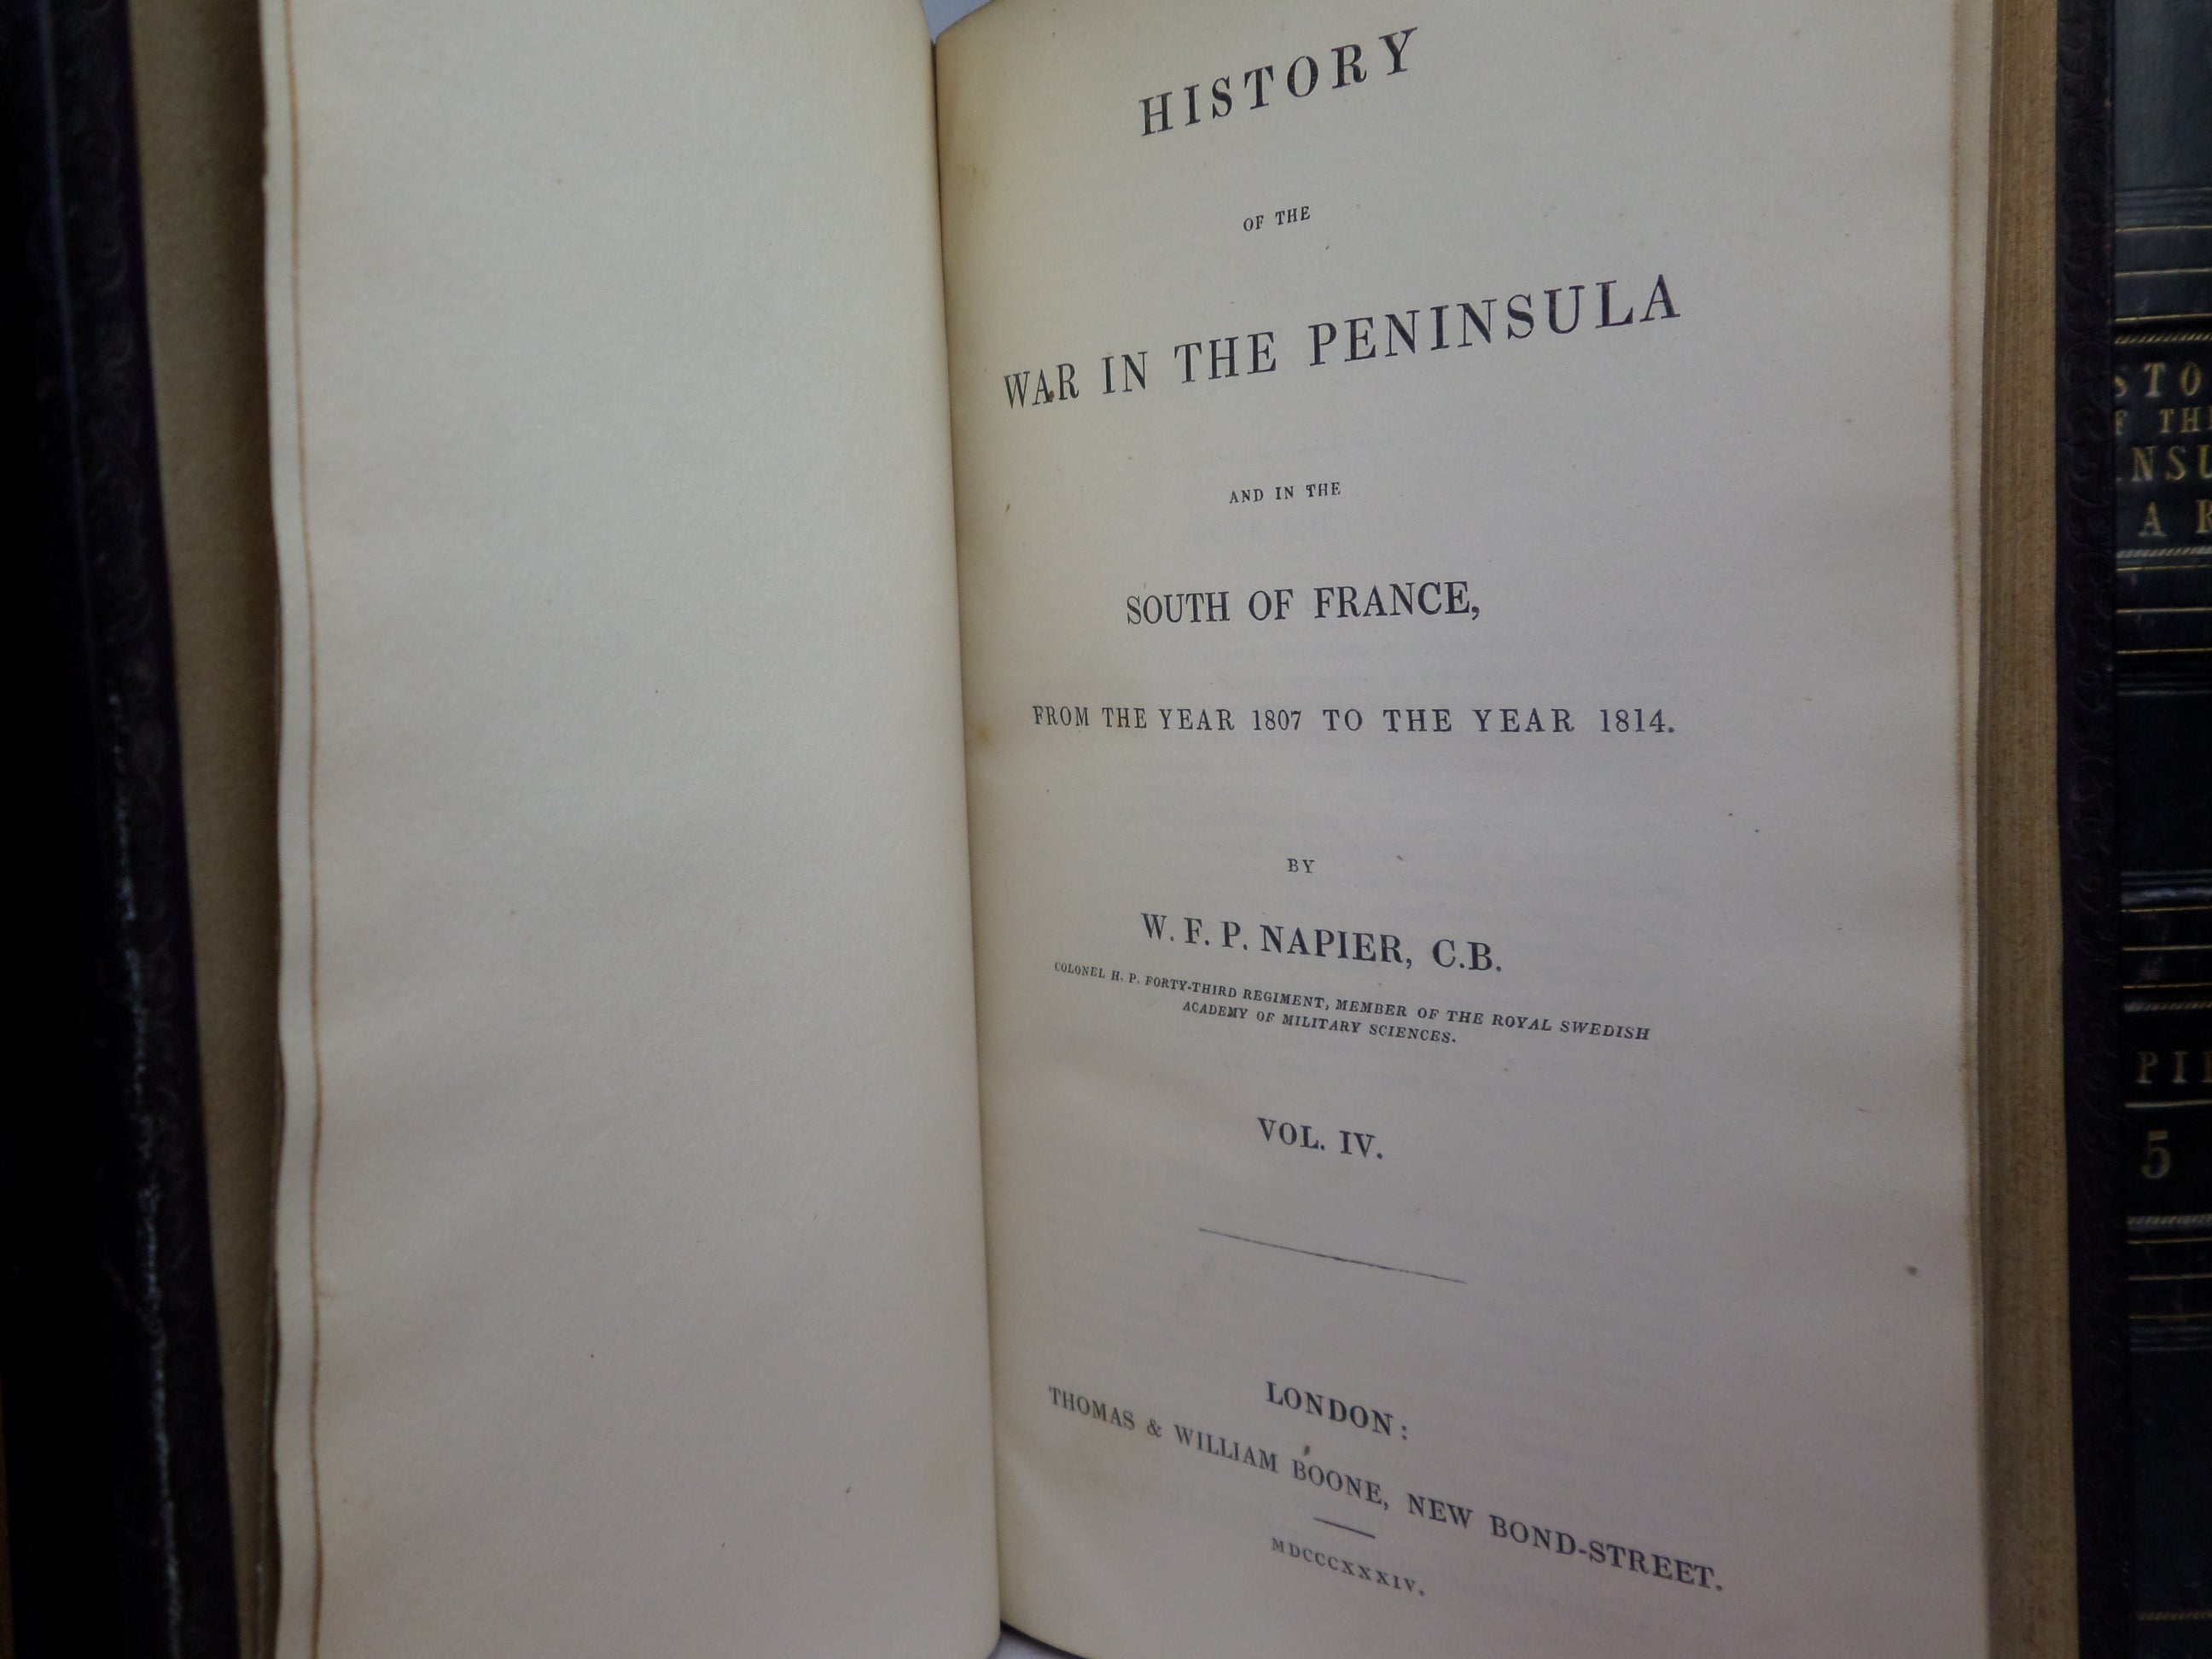 HISTORY OF THE WAR IN THE PENINSULA BY W F P NAPIER 1833-40 LEATHER-BOUND 6 VOLS